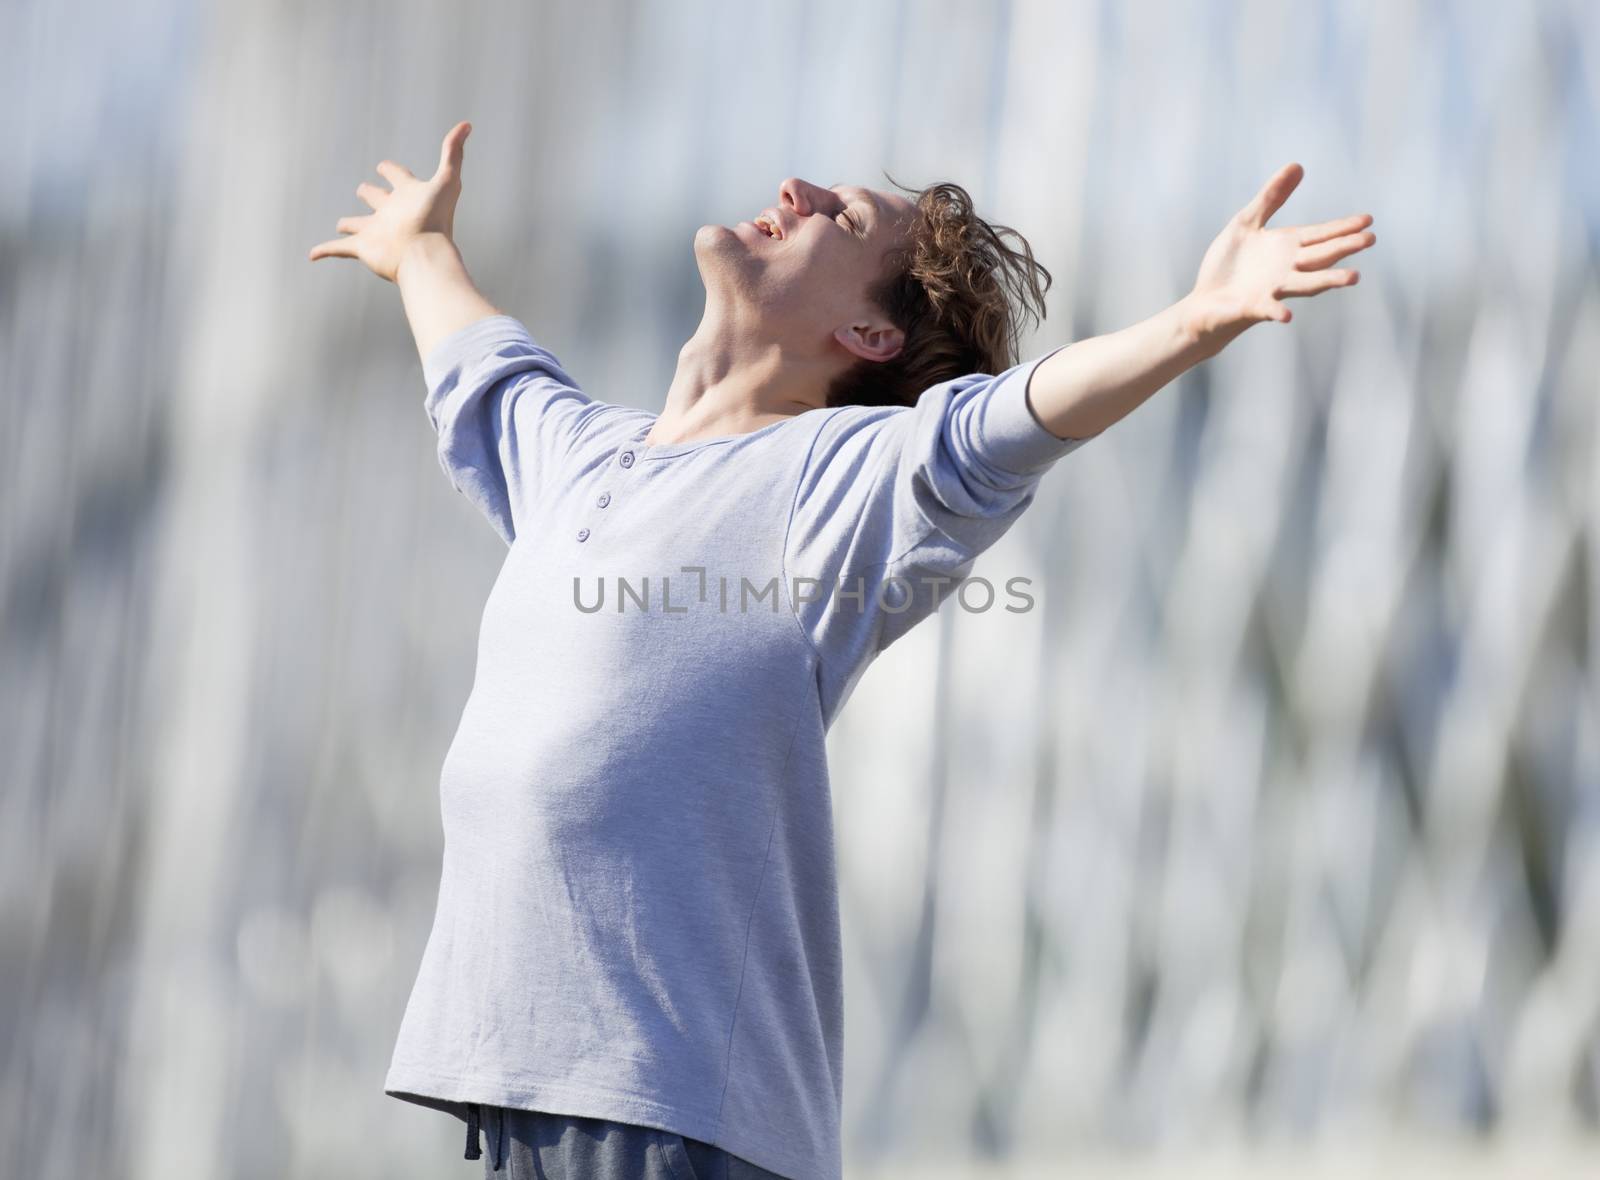 Excited Young Man Stretching out his Arm in Emotion Outdoors